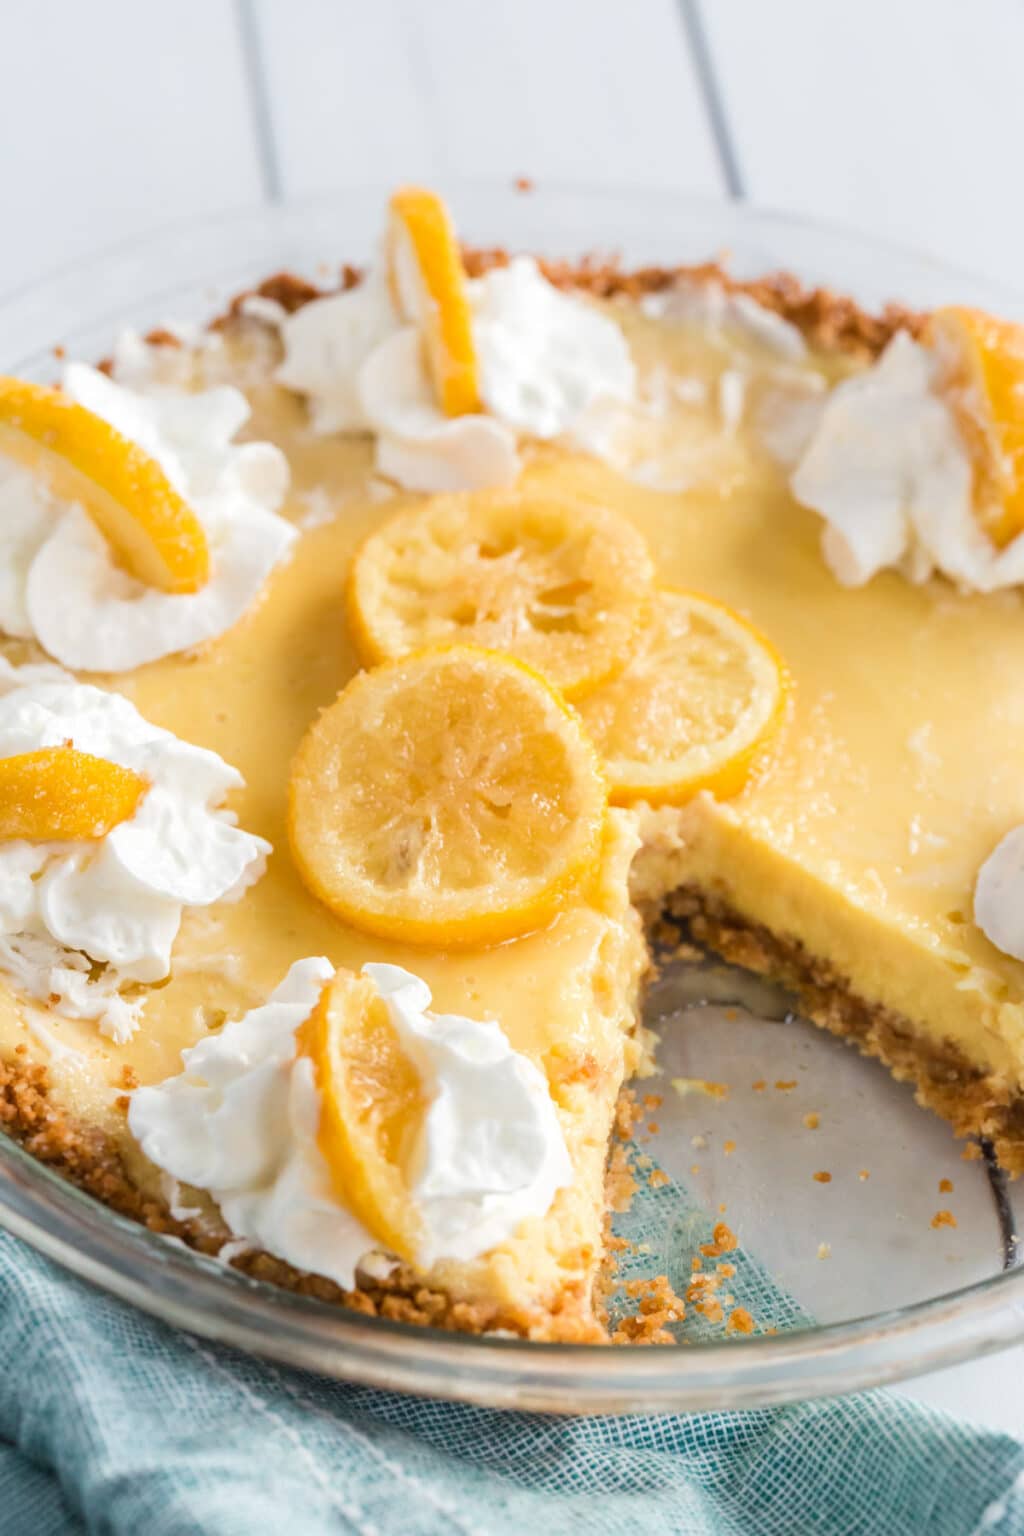 Creamy Lemon Pie with Candied Lemon Slices - Kylee Cooks